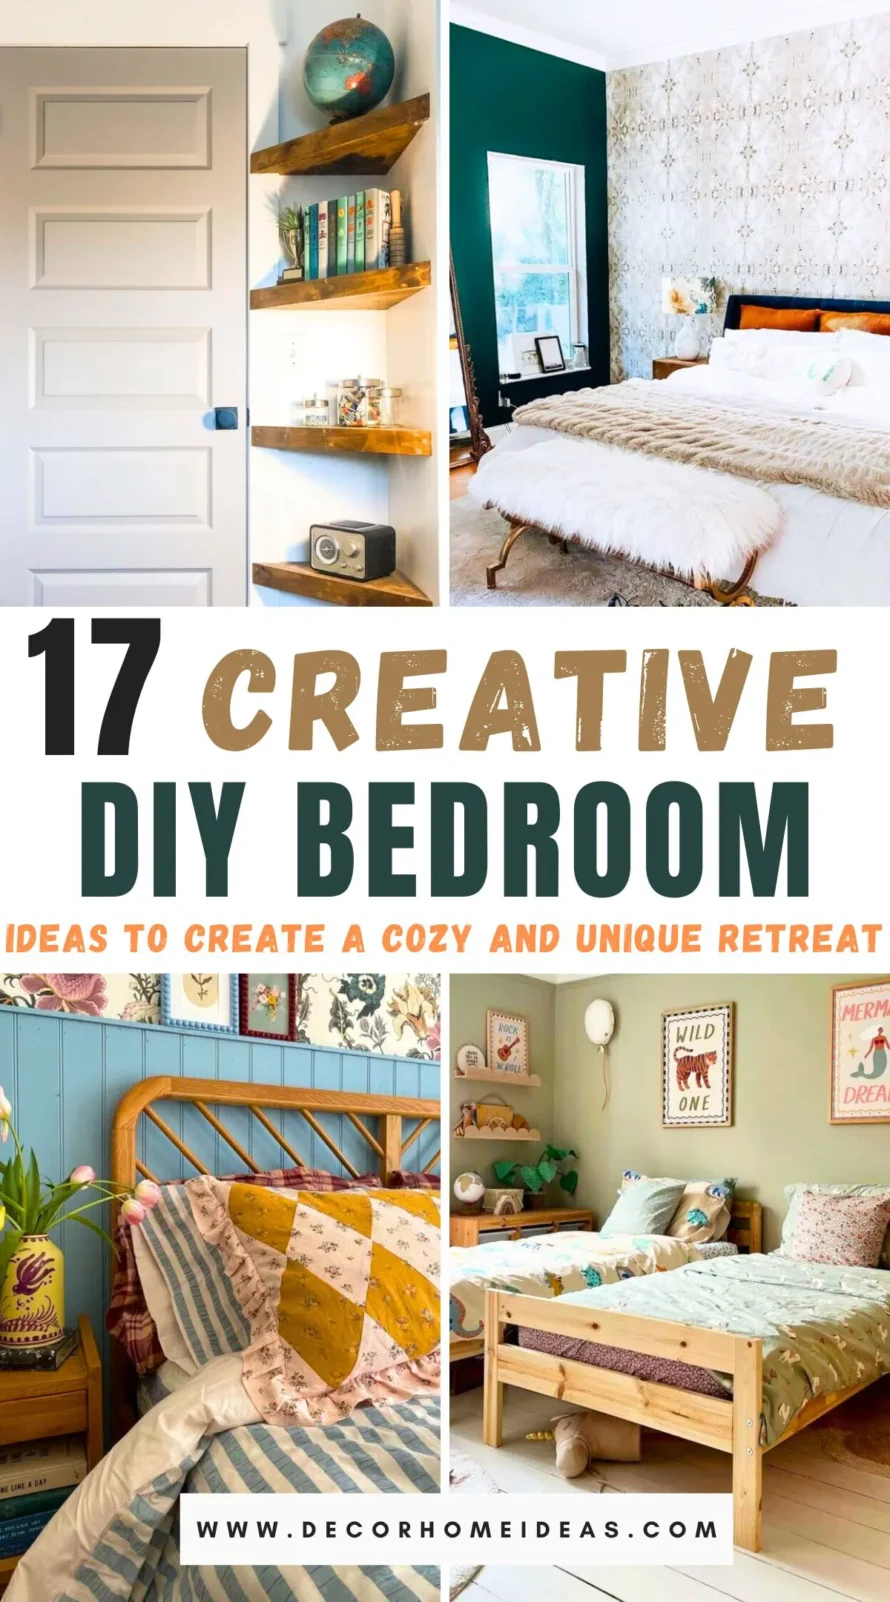 Transform your bedroom into a cozy sanctuary with our guide on DIY bedroom decor. Discover 17 handmade projects that will add a personal touch to your space, from unique wall art and custom bedding to creative lighting solutions. Dive in to explore these easy-to-follow tutorials and make your bedroom truly your own!